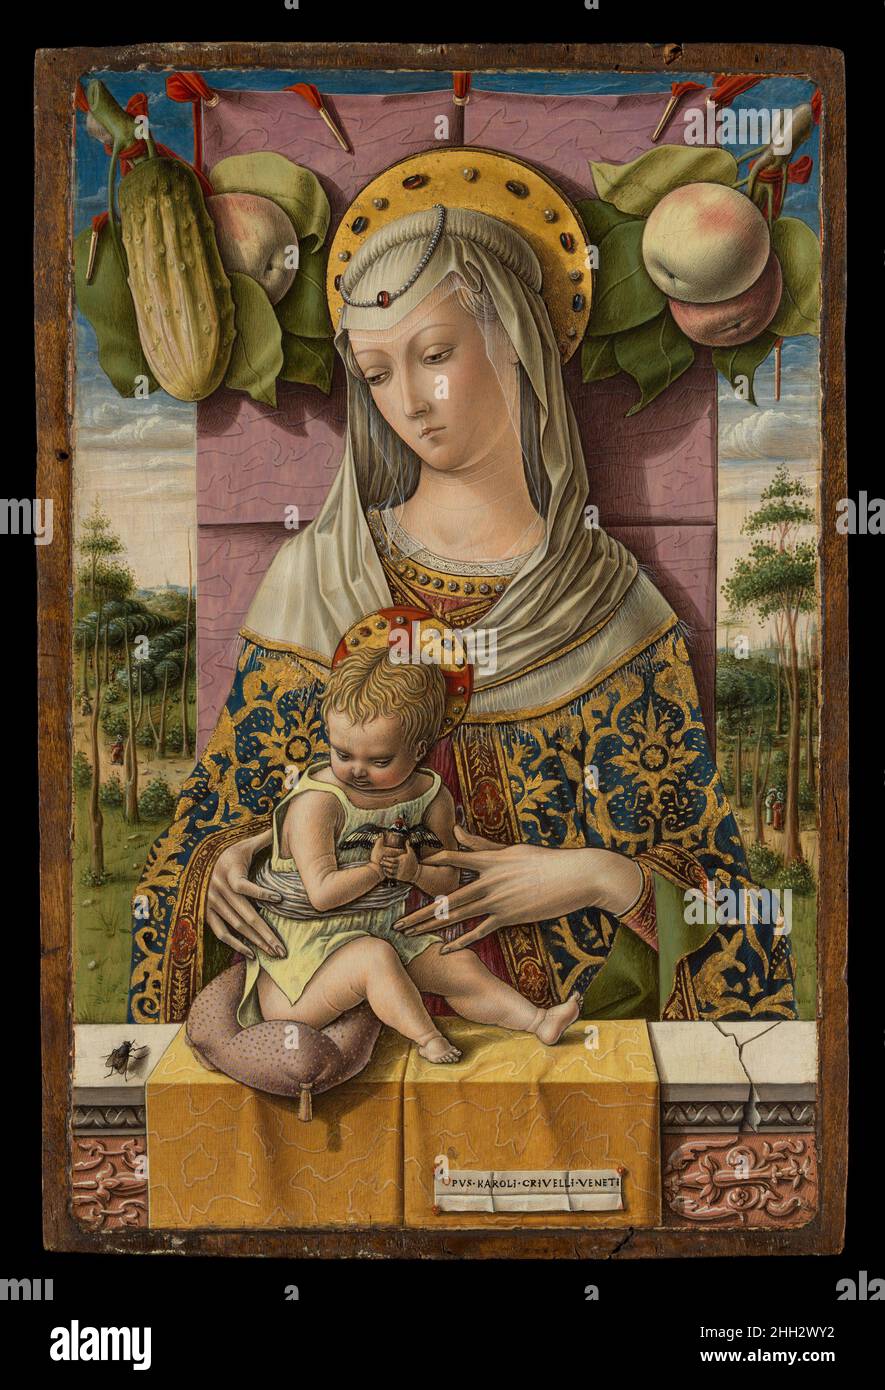 Madonna and Child ca. 1480 Carlo Crivelli Italian This perfectly preserved work is one of the artist's most exquisite pictures. Flemish painting may have inspired the remarkable precision of detail in the background, where turbaned figures (infidels) stroll. Trompe-l’oeil details are played against the doll-like prettiness of the Virgin. The apples and fly are symbols of sin and evil and are opposed to the cucumber and the goldfinch, symbols of redemption. Crivelli’s signature is on what looks like a piece of paper attached to the watered-silk cloth with wax. Listen to experts illuminate this Stock Photo